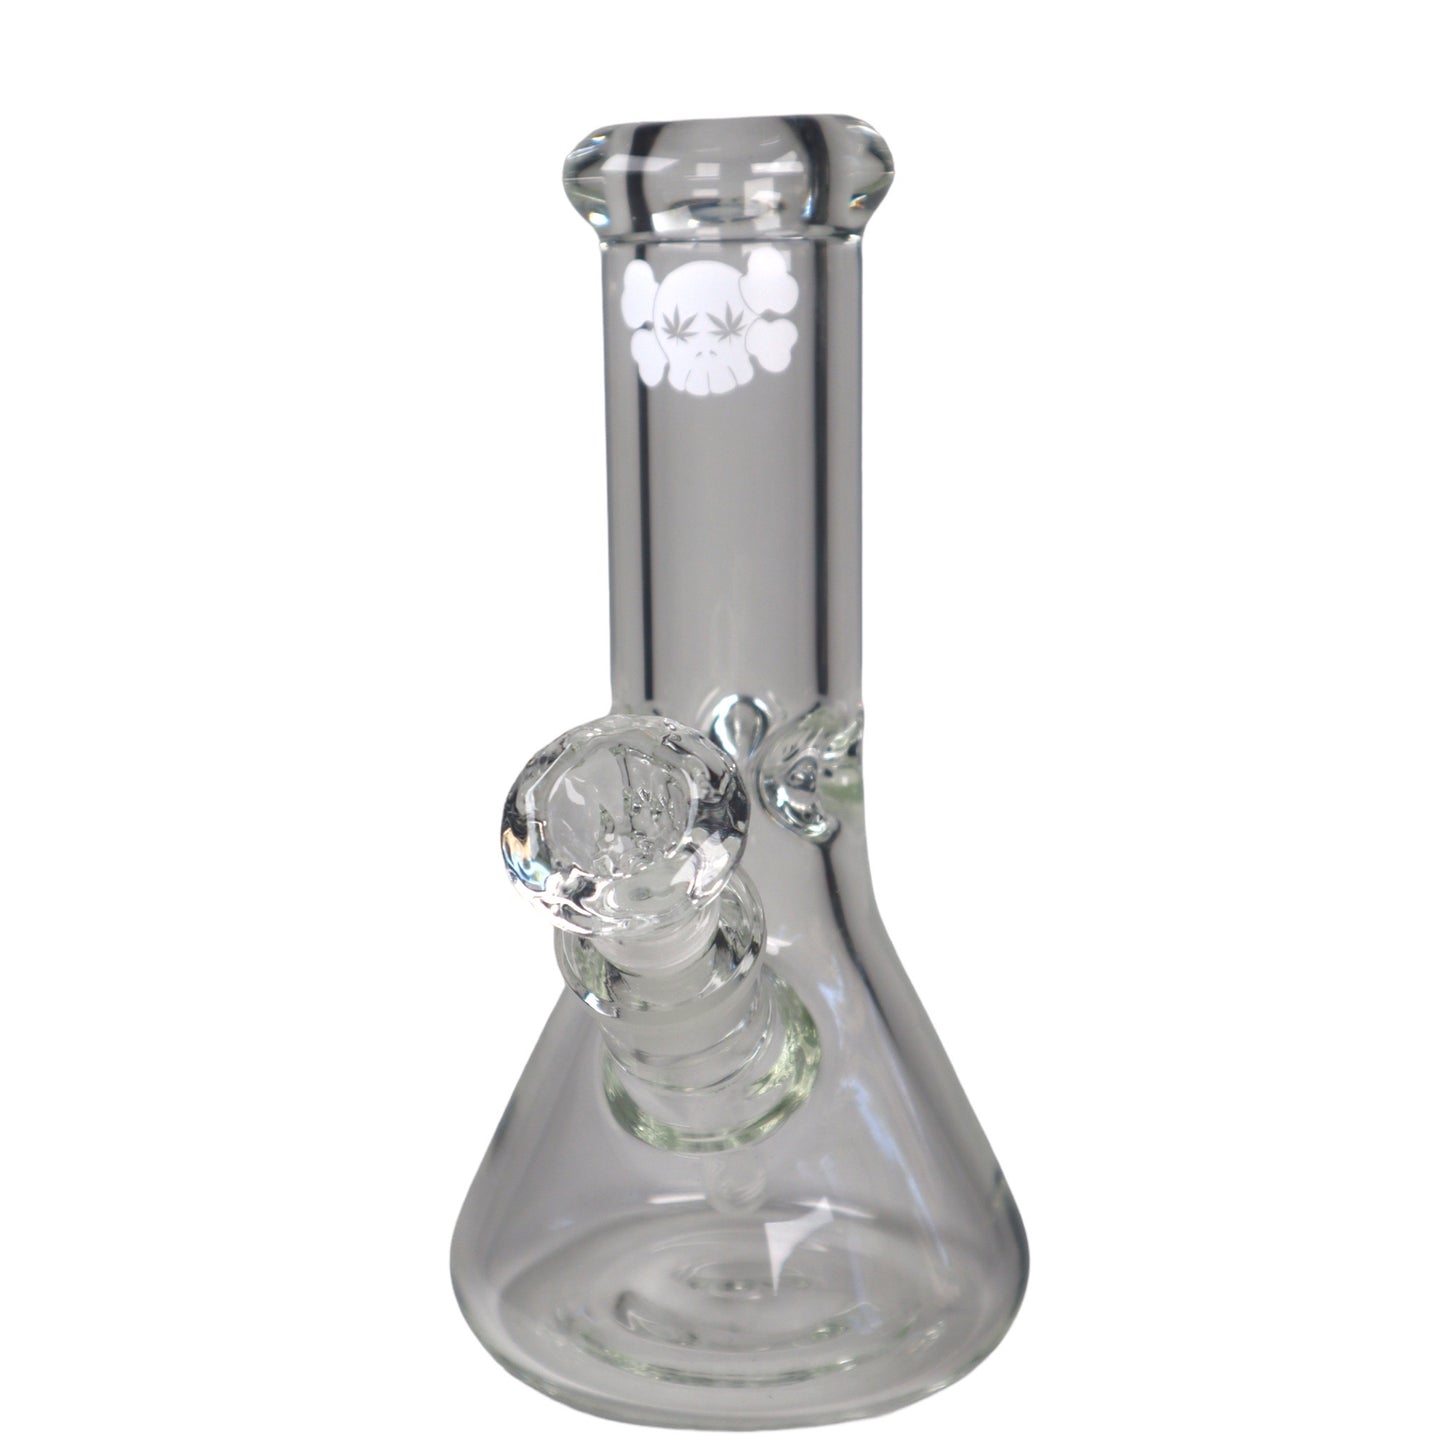 11" Stoned to the Dome Heavy Glass Beaker Bong